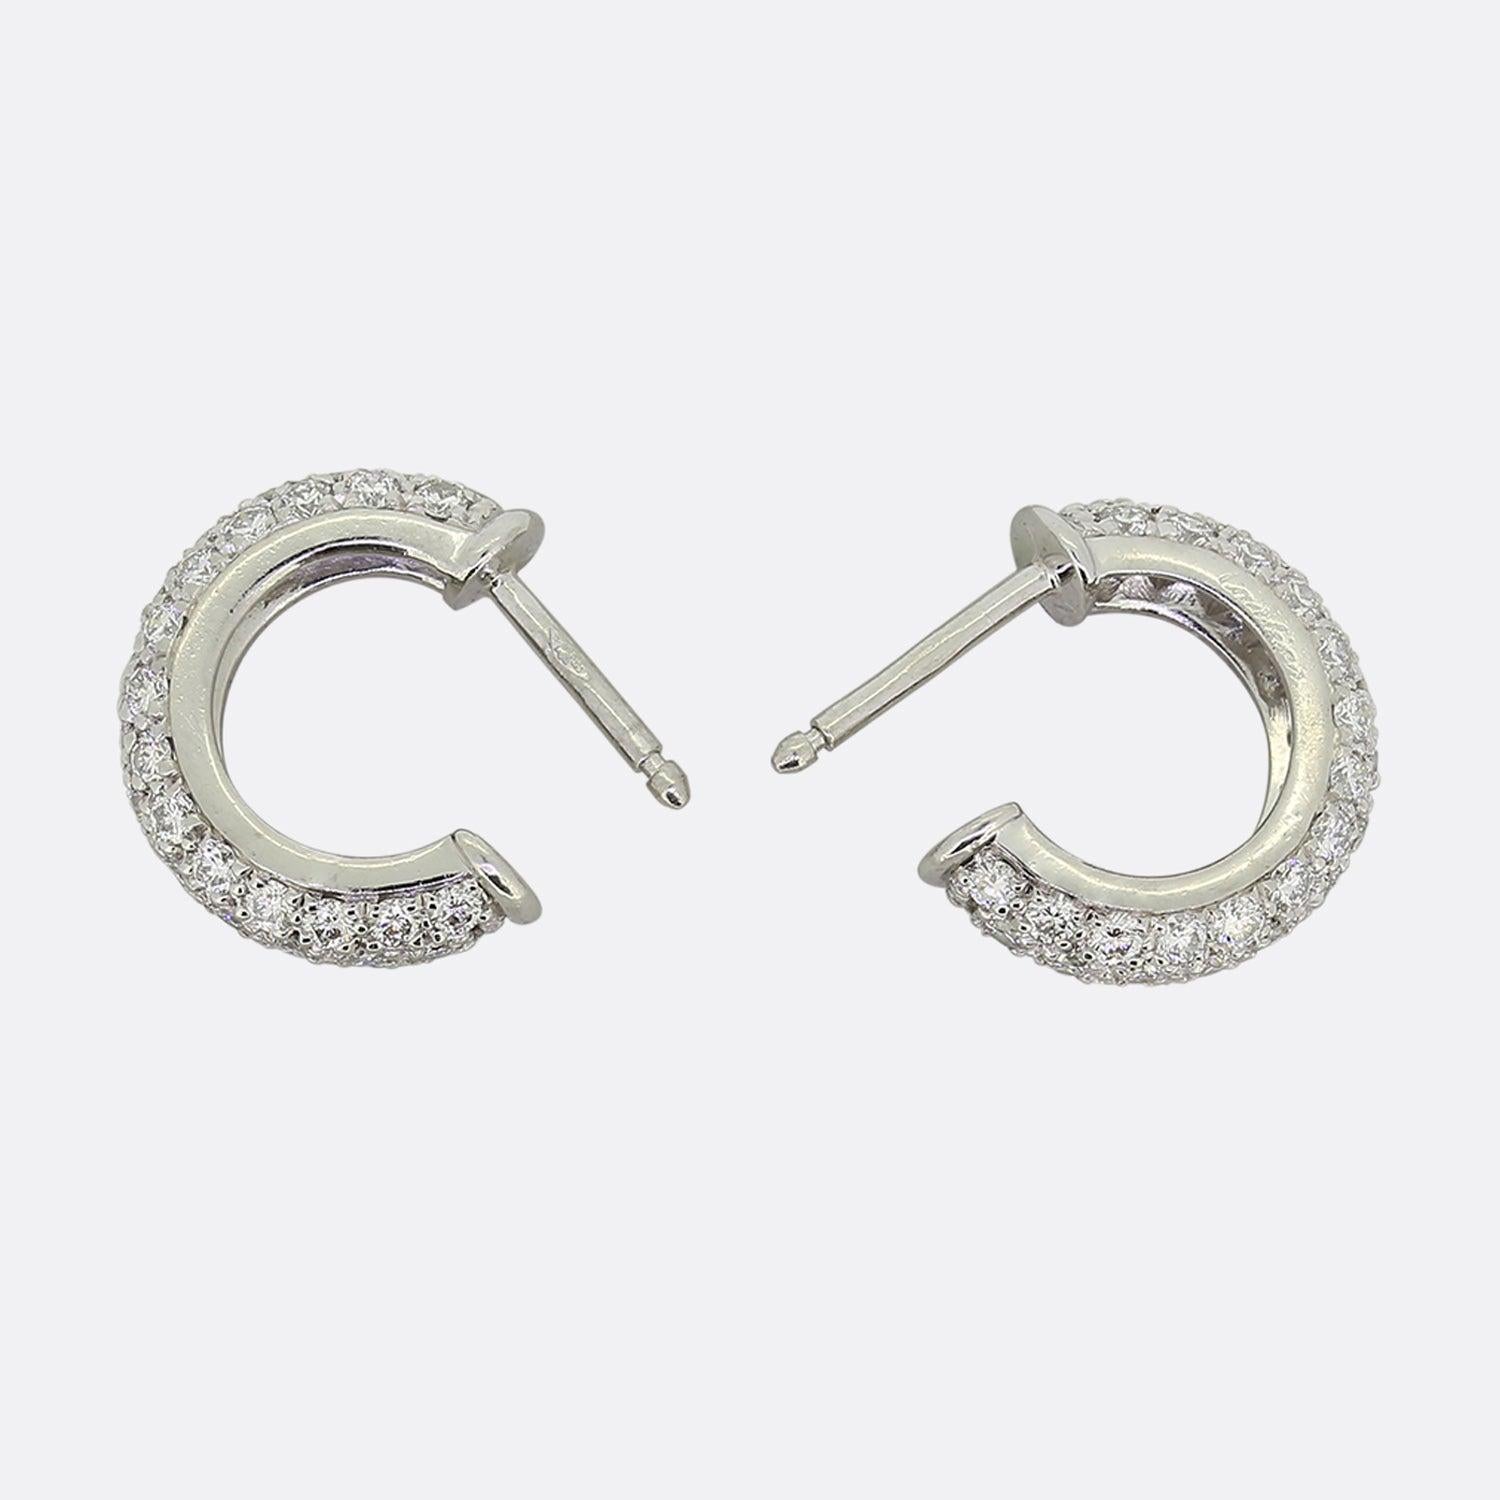 This is a fabulous pair of small platinum diamond earrings from the world renowned jewellery house of Cartier. Each piece has been crafted into the shape of a hoop pavé set with an array of round brilliant cut diamonds. 

Condition: Used (Very